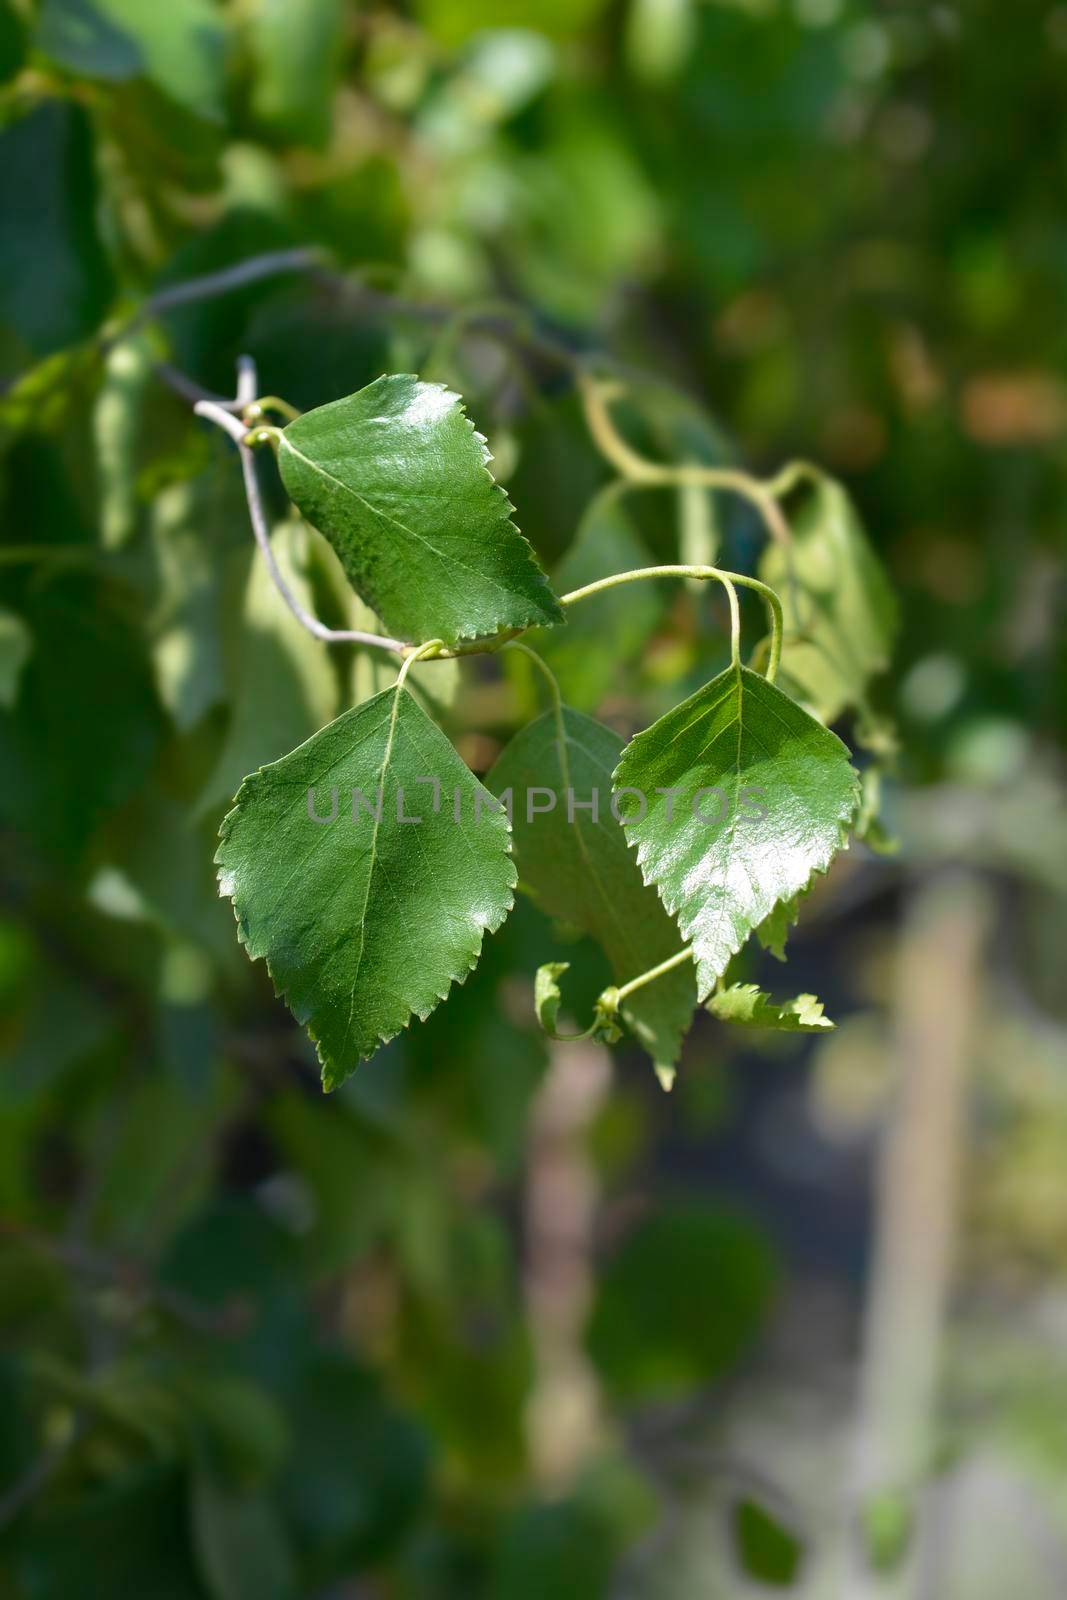 Spider Alley birch leaves - Latin name - Betula pendula Spider Alley